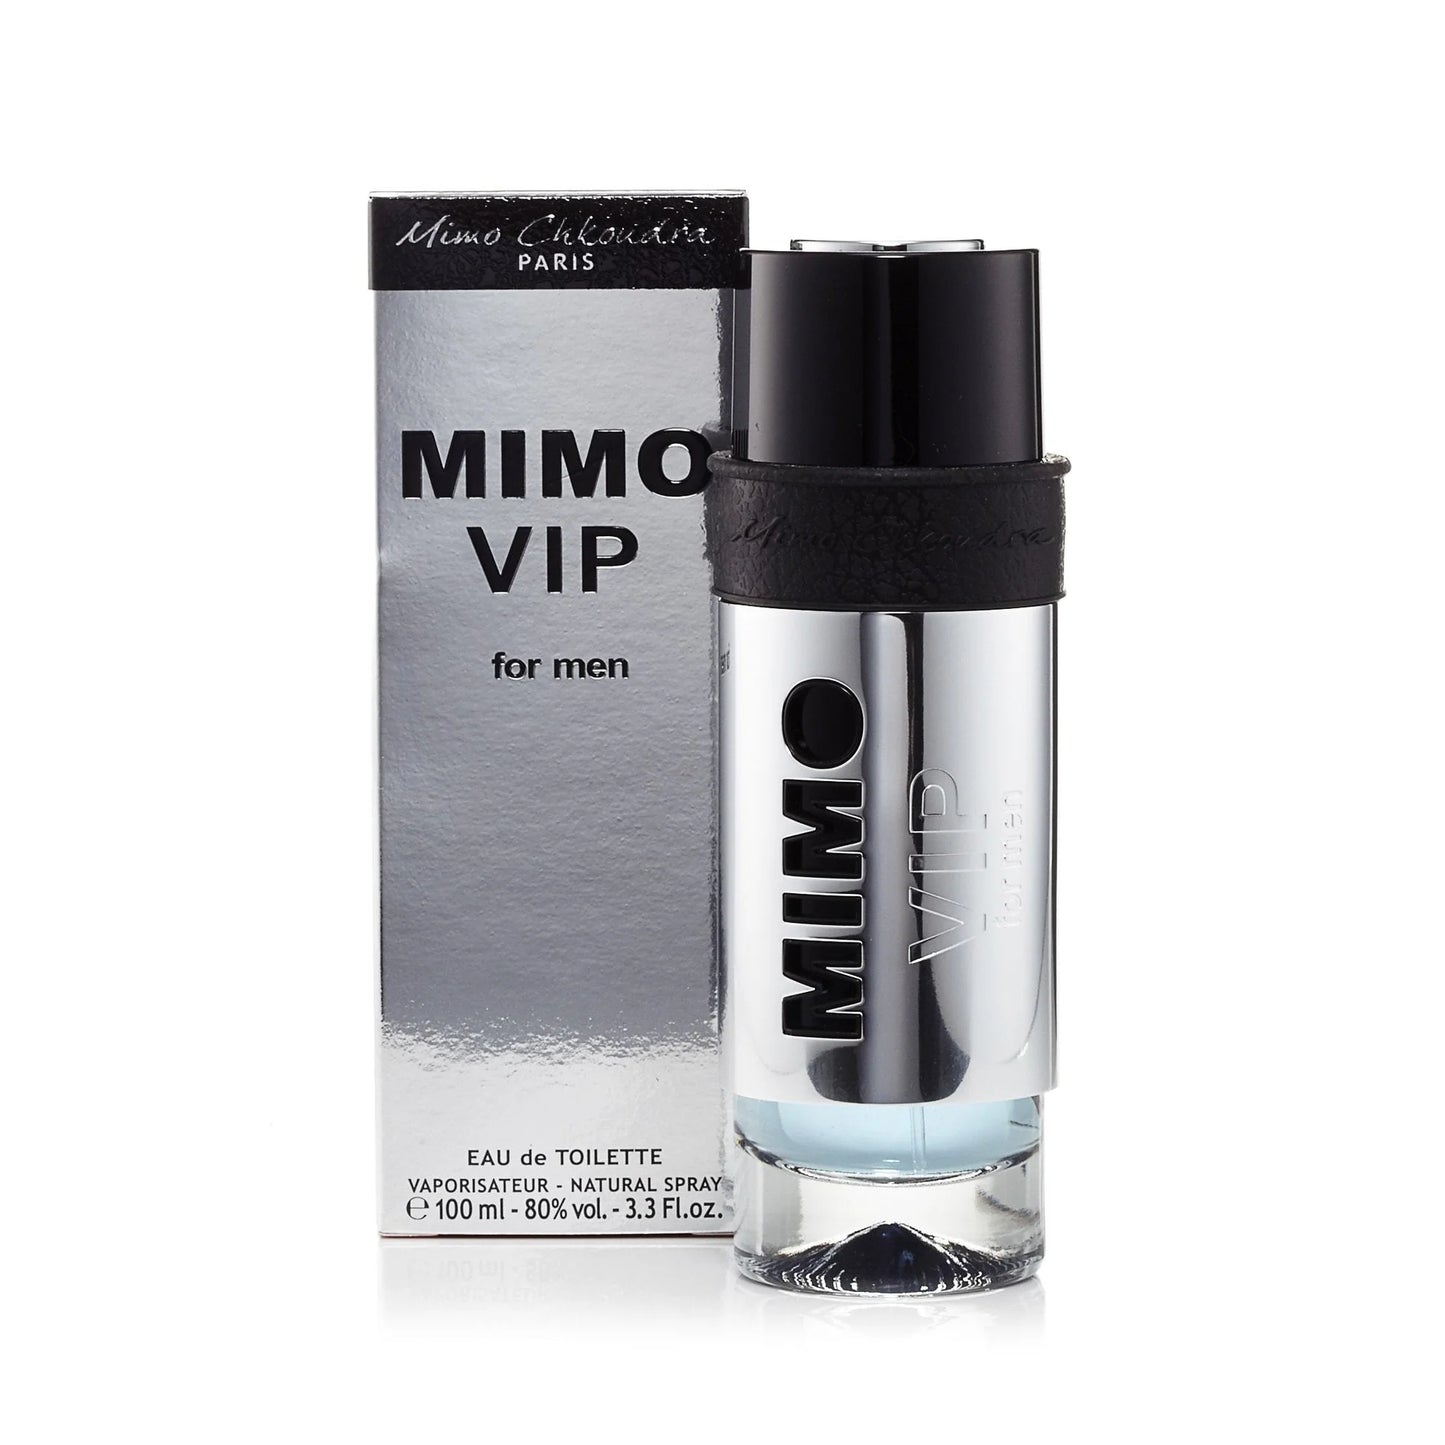 Mimo Vip EDT for Men - Perfume Planet 